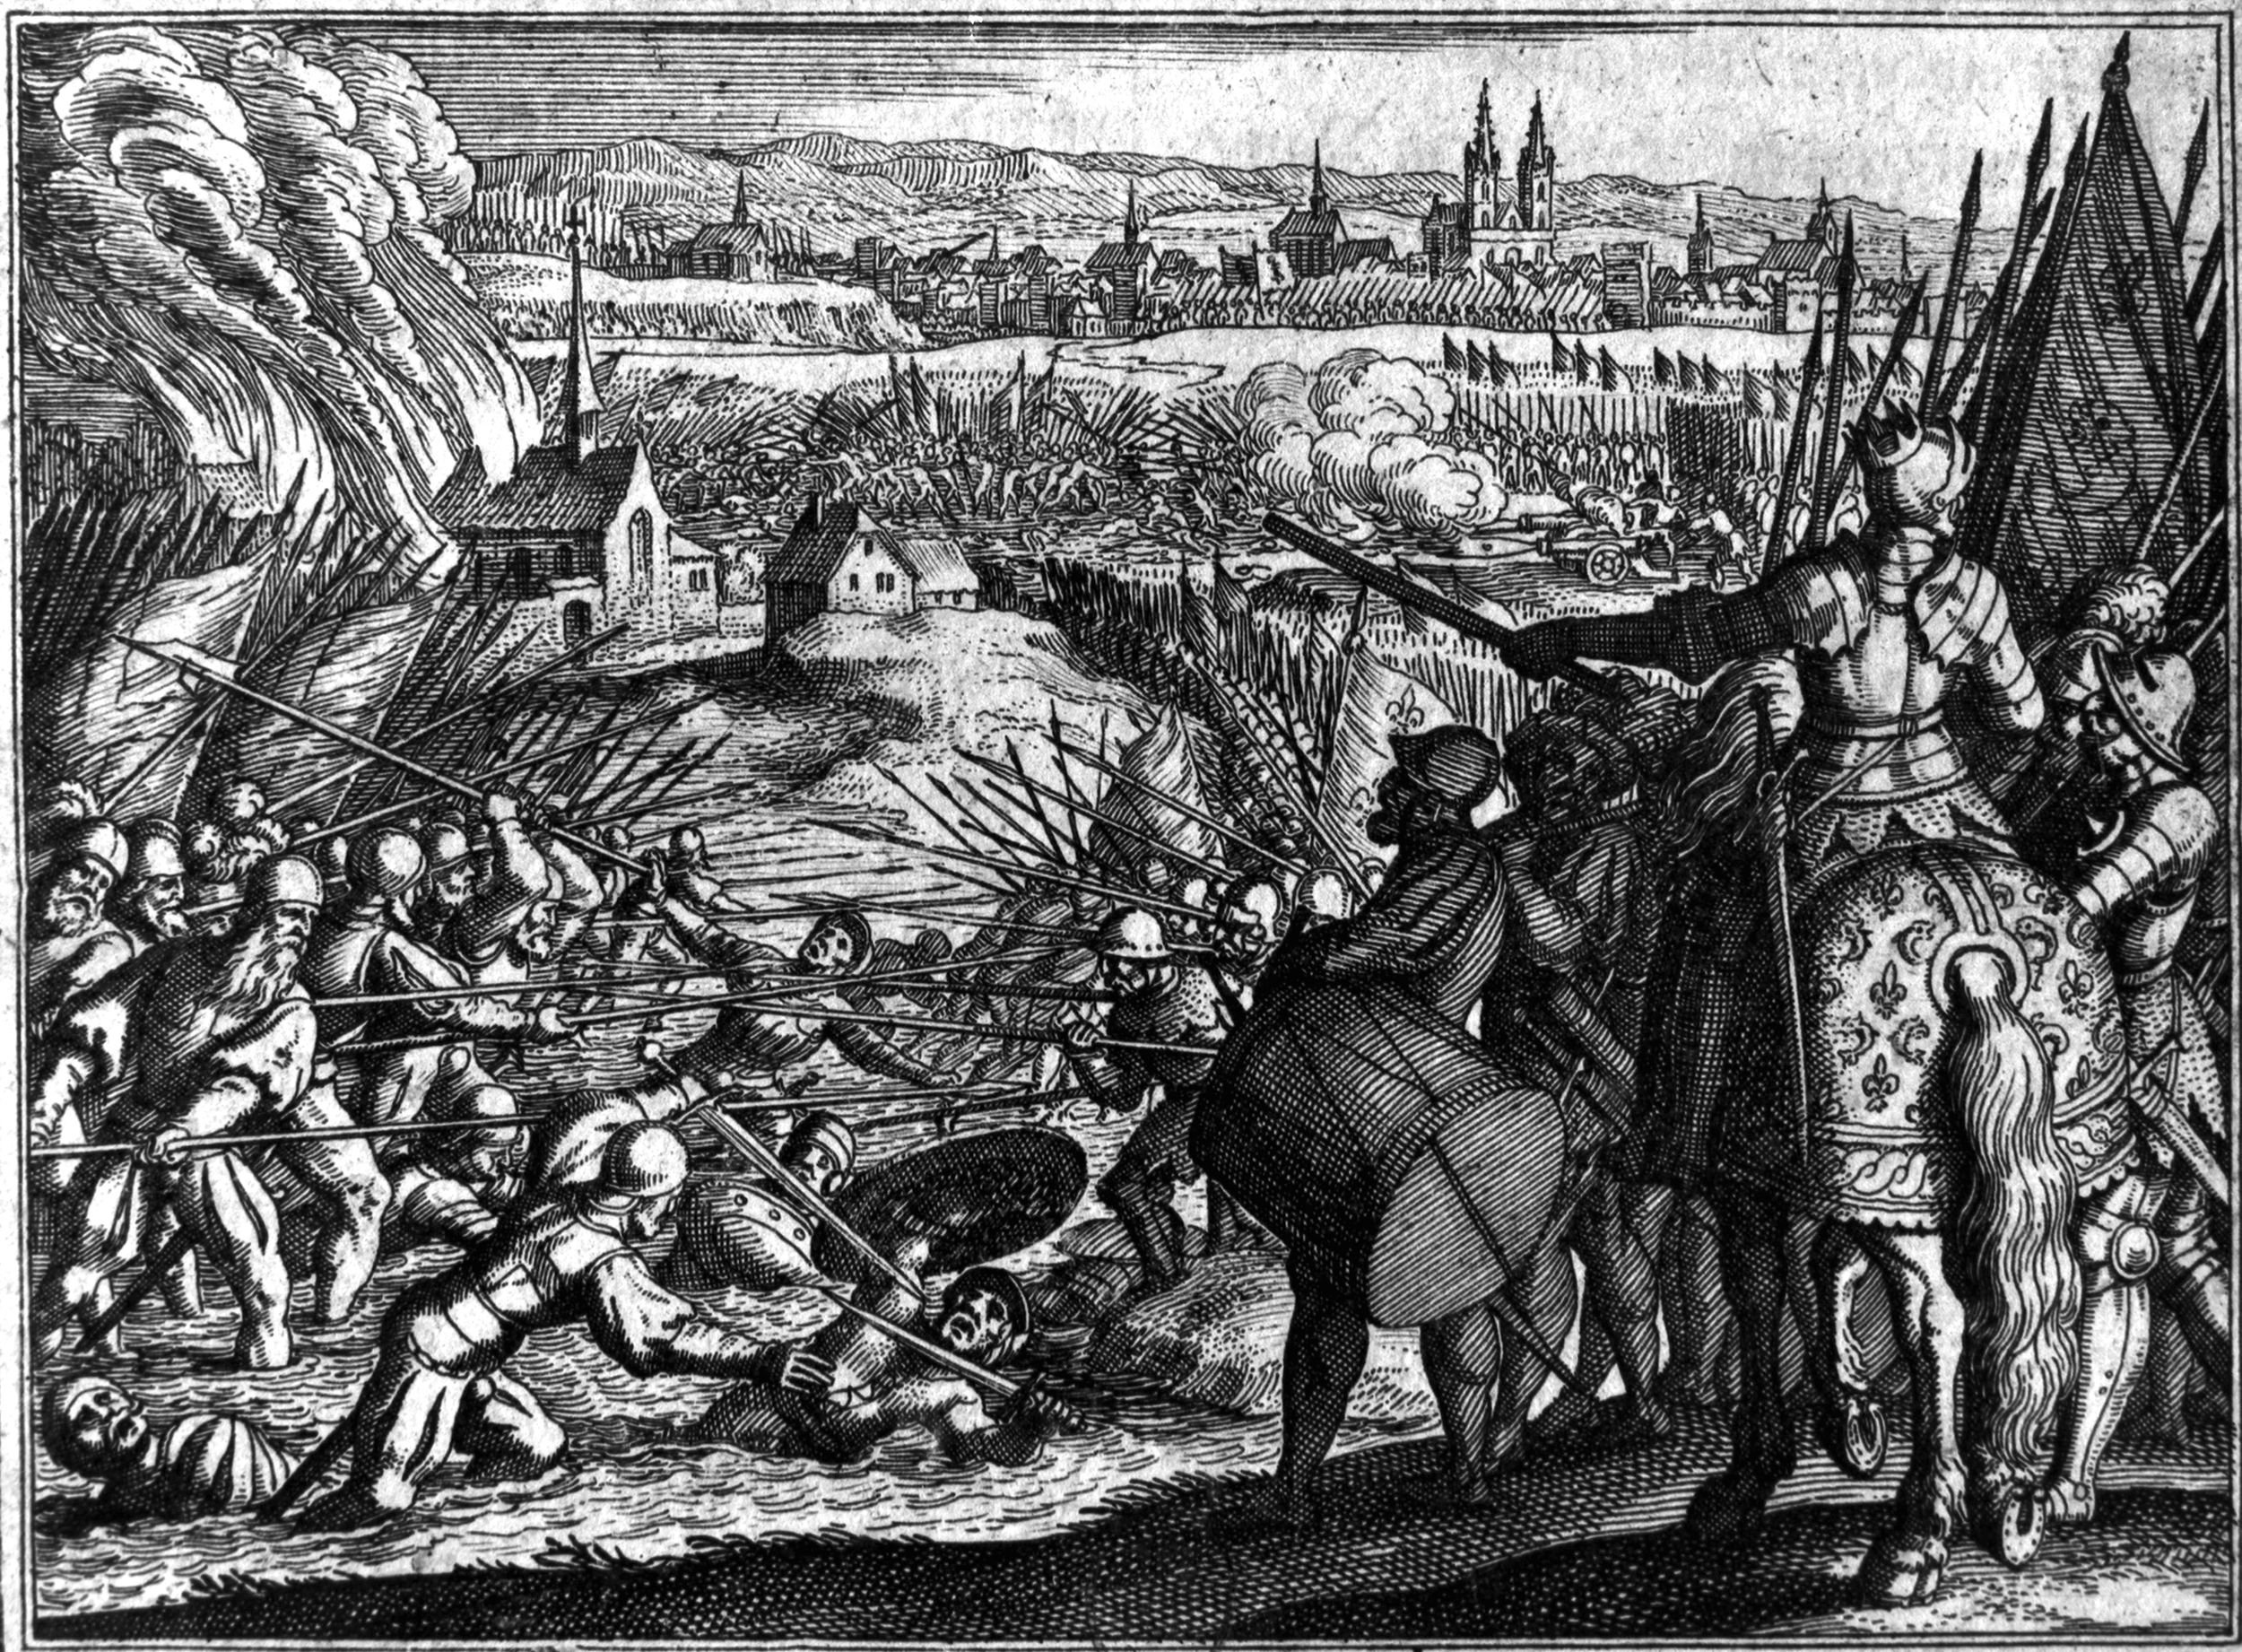 This 17th-century engraving captures some of the ferocity of the fighting between the French and Spanish pikemen at Cerignola.